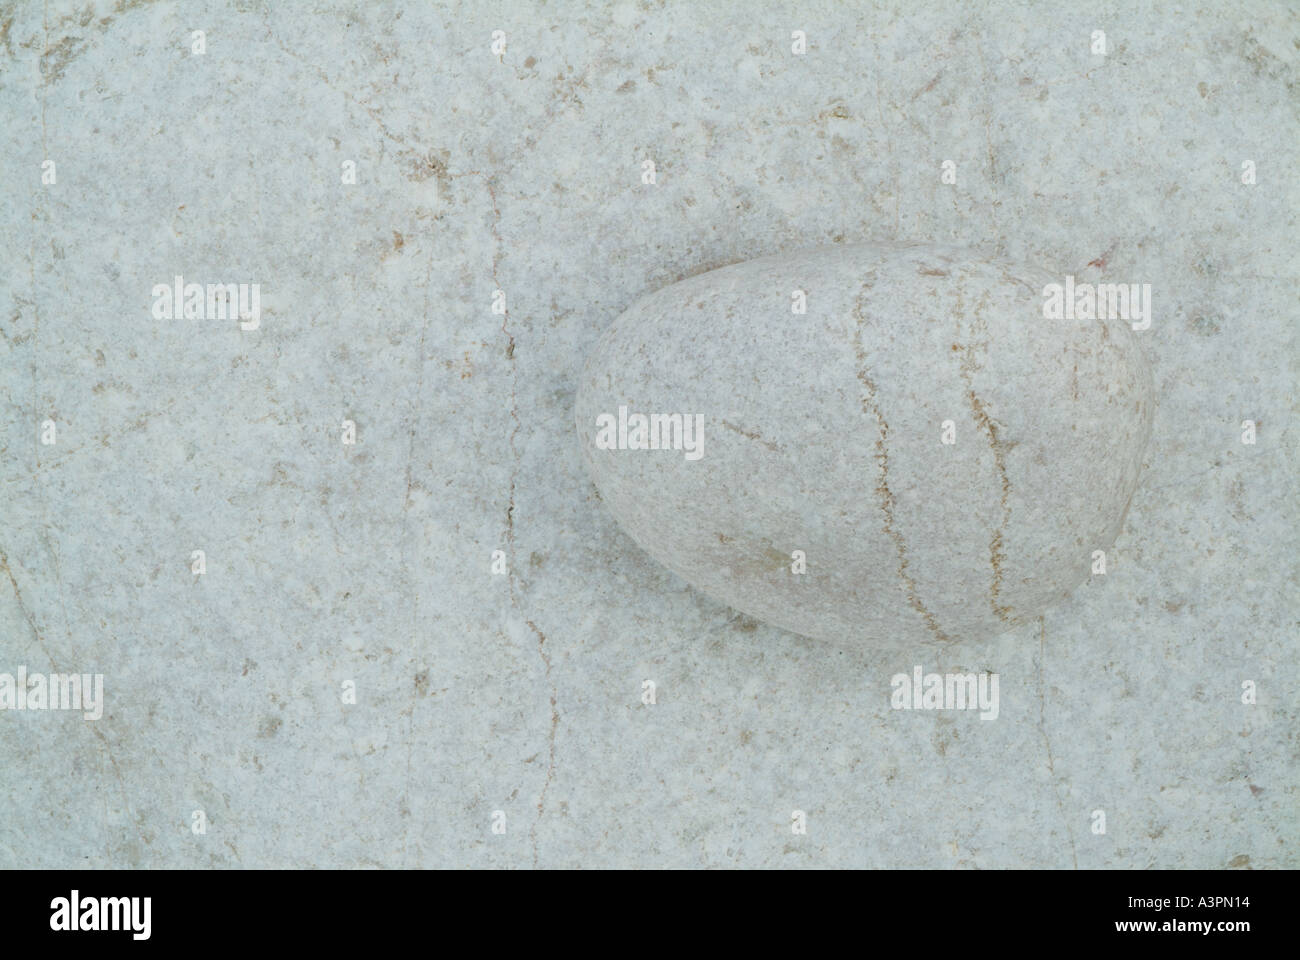 Small oval white pebble on a larger white rock in an abstract pattern Portugal beach EU Stock Photo